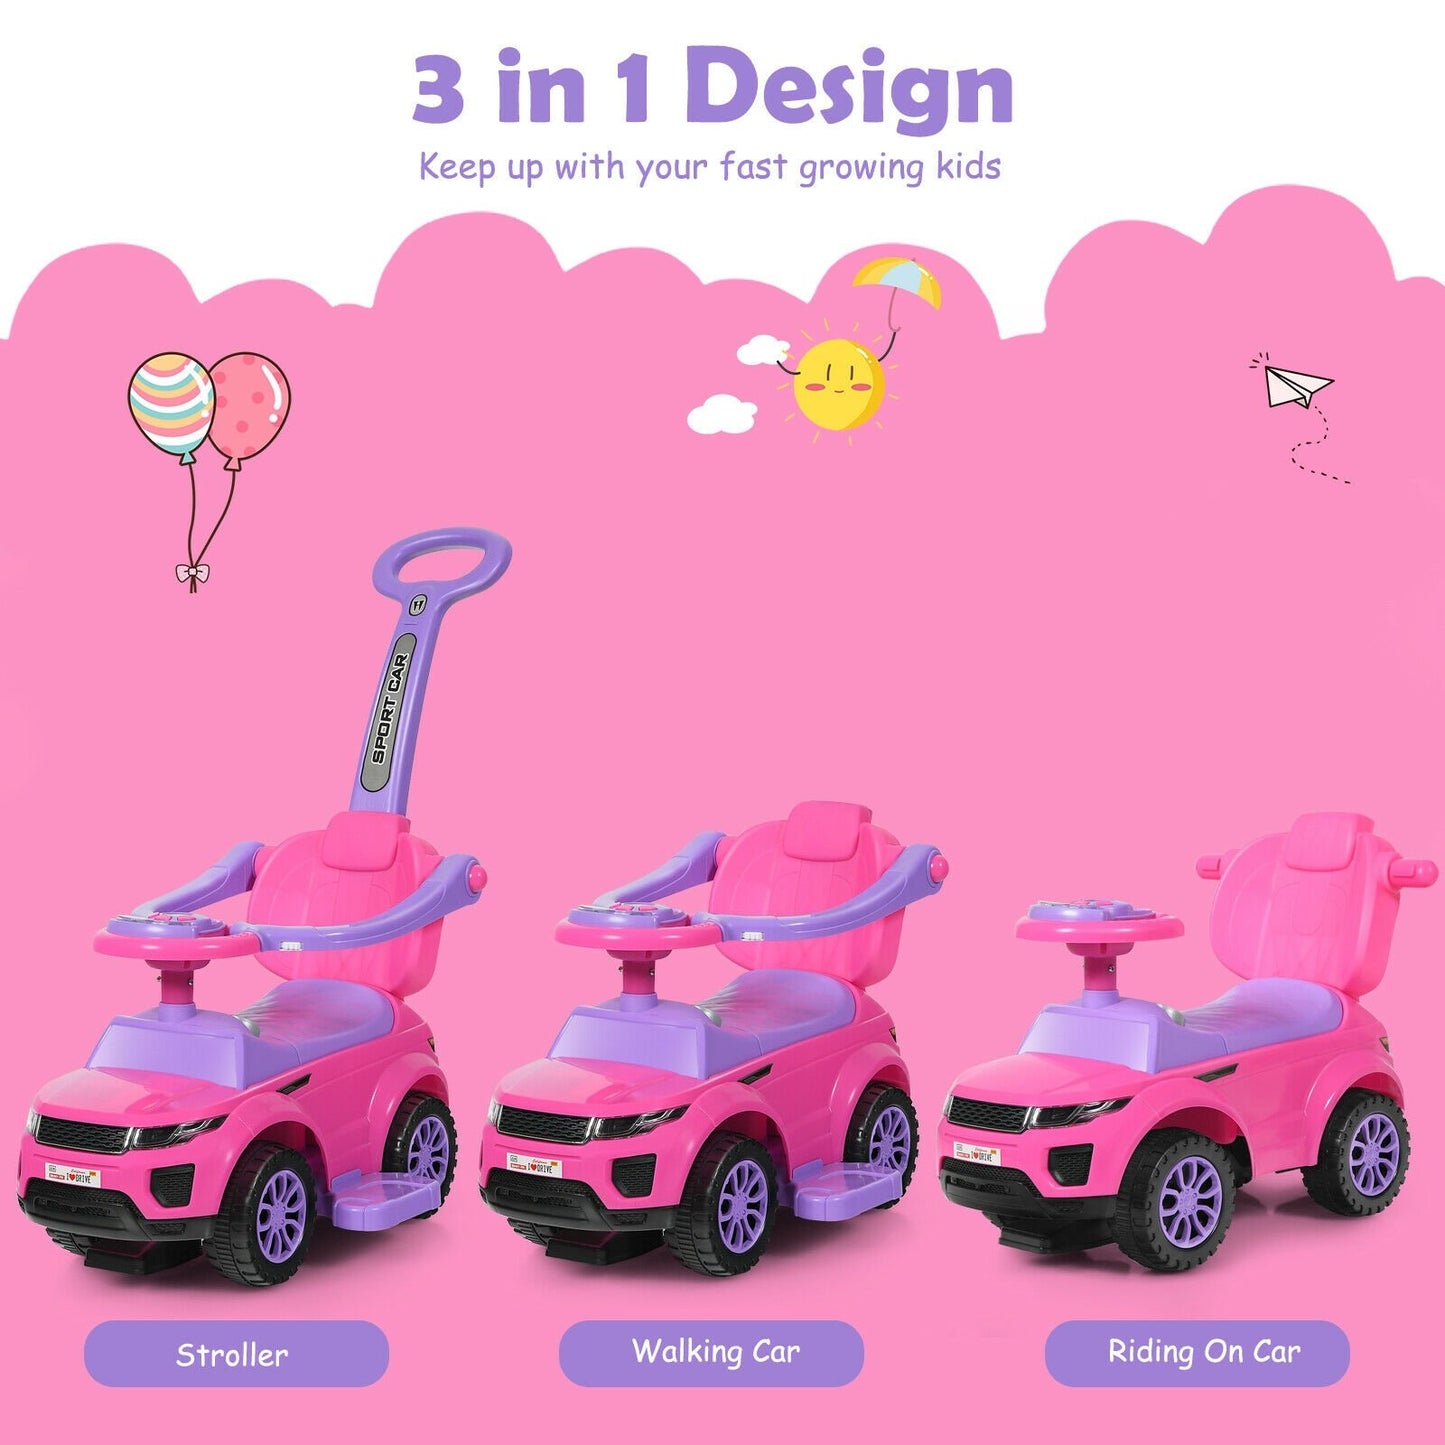 Honey Joy 3 in 1 Ride on Push Car Toddler Stroller Sliding Car with Music, Pink at Gallery Canada